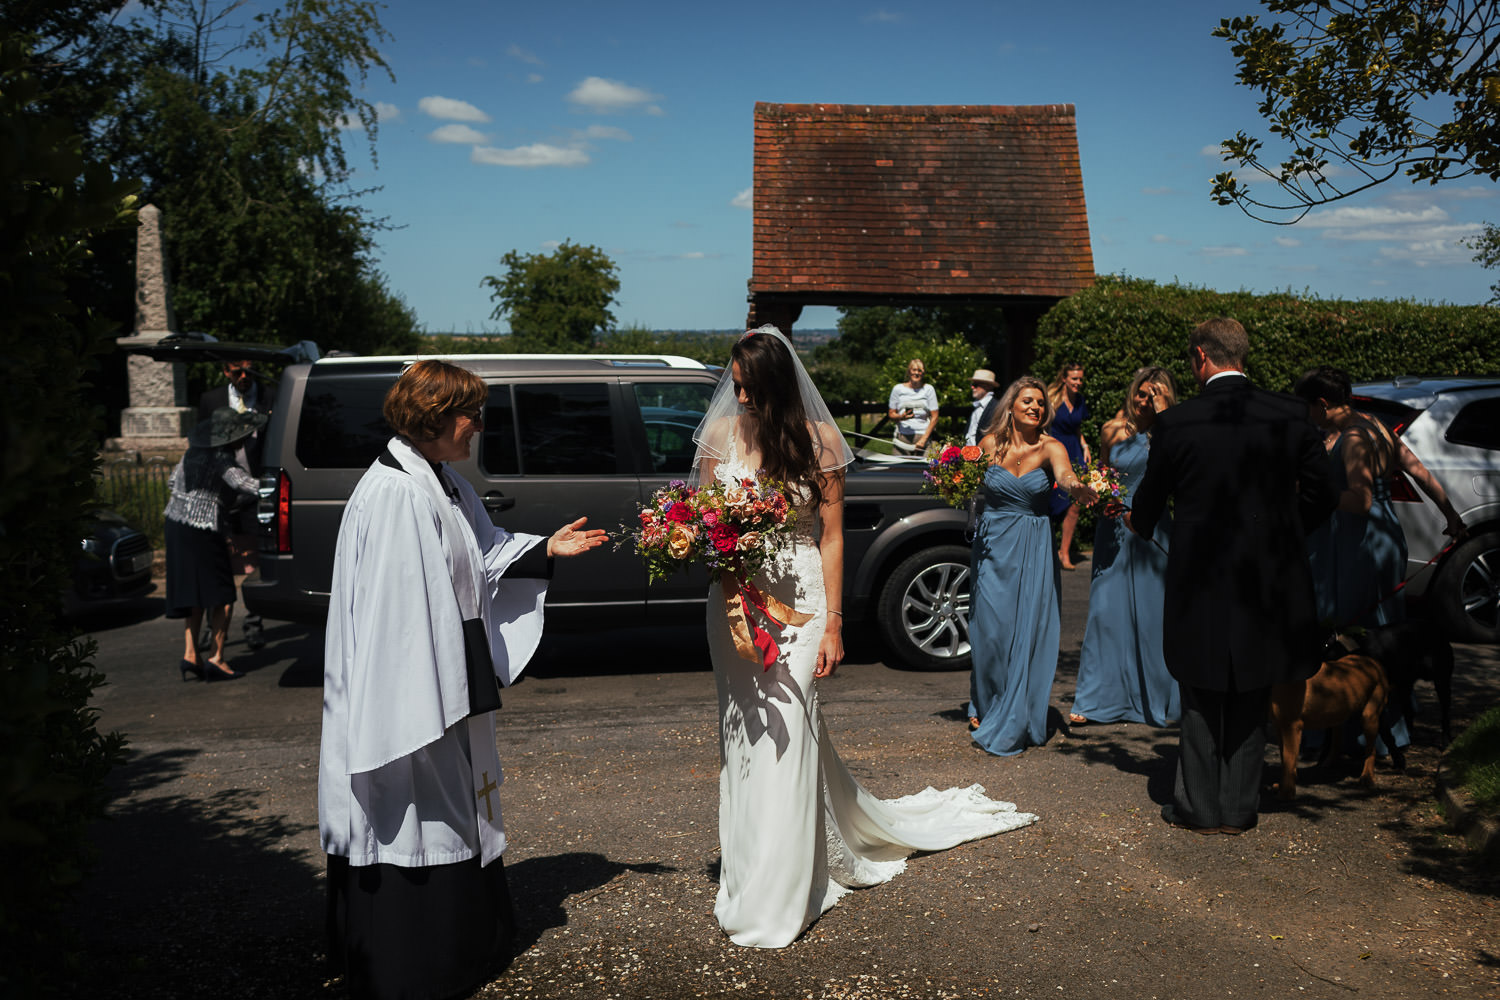 Reverend Julie Willmot greets a bride as she arrives at All Saints Church in Purleigh Essex, near Maldon. Bridesmaids are behind her in blue dresses and the sky is blue. Bride is wearing Stella York 6648 from The Wedding Shop in Colchester. Photography by South Woodham Essex wedding photographer Tracy.